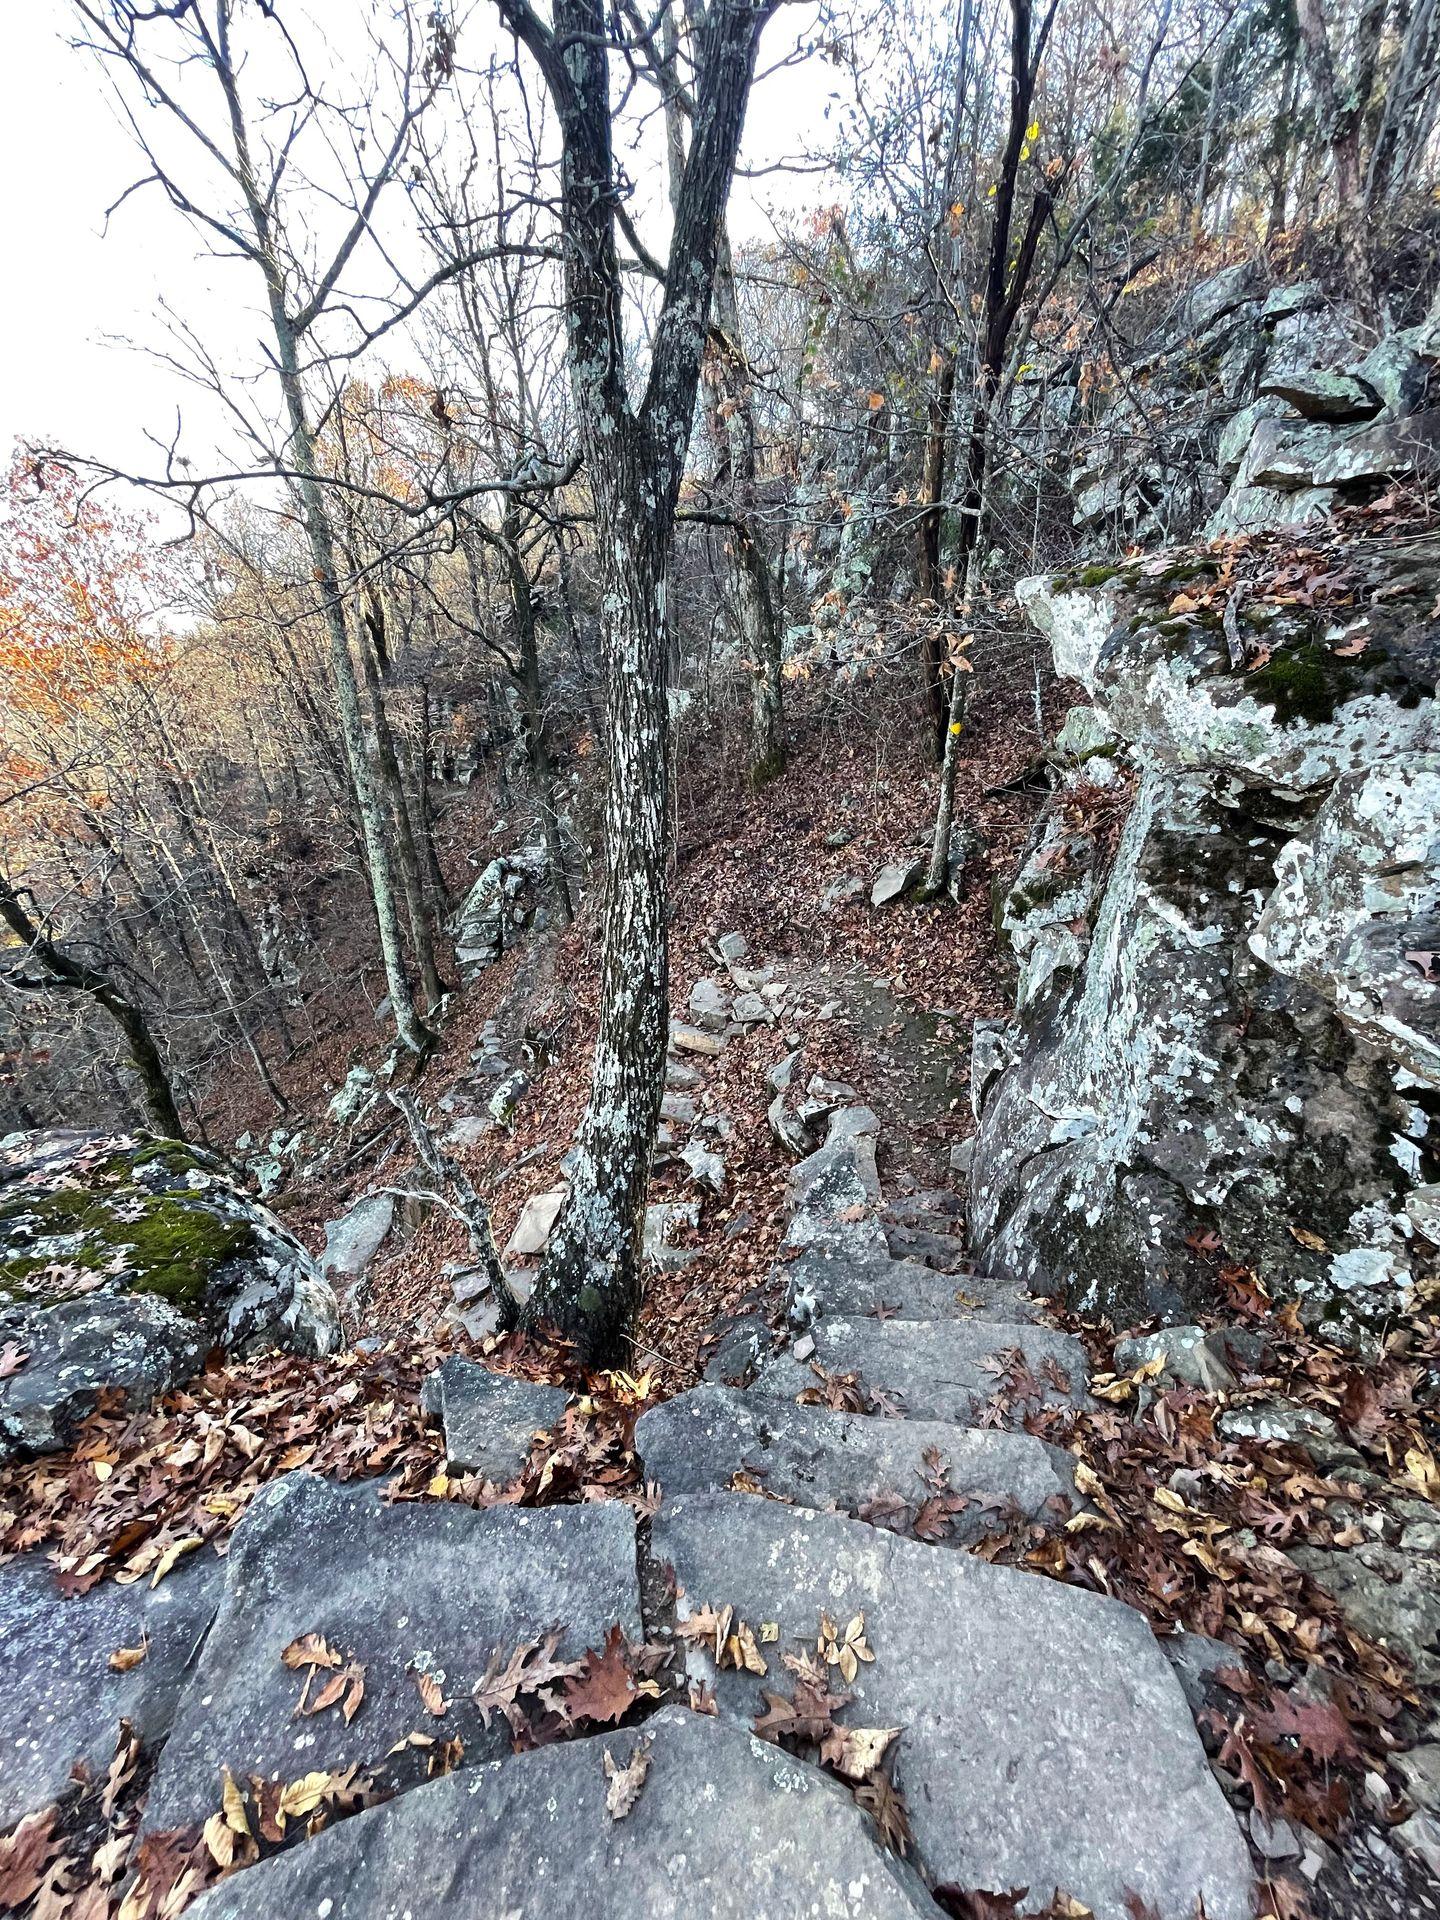 Stone steps along a gray rock face on a trail in Mount Nebo.